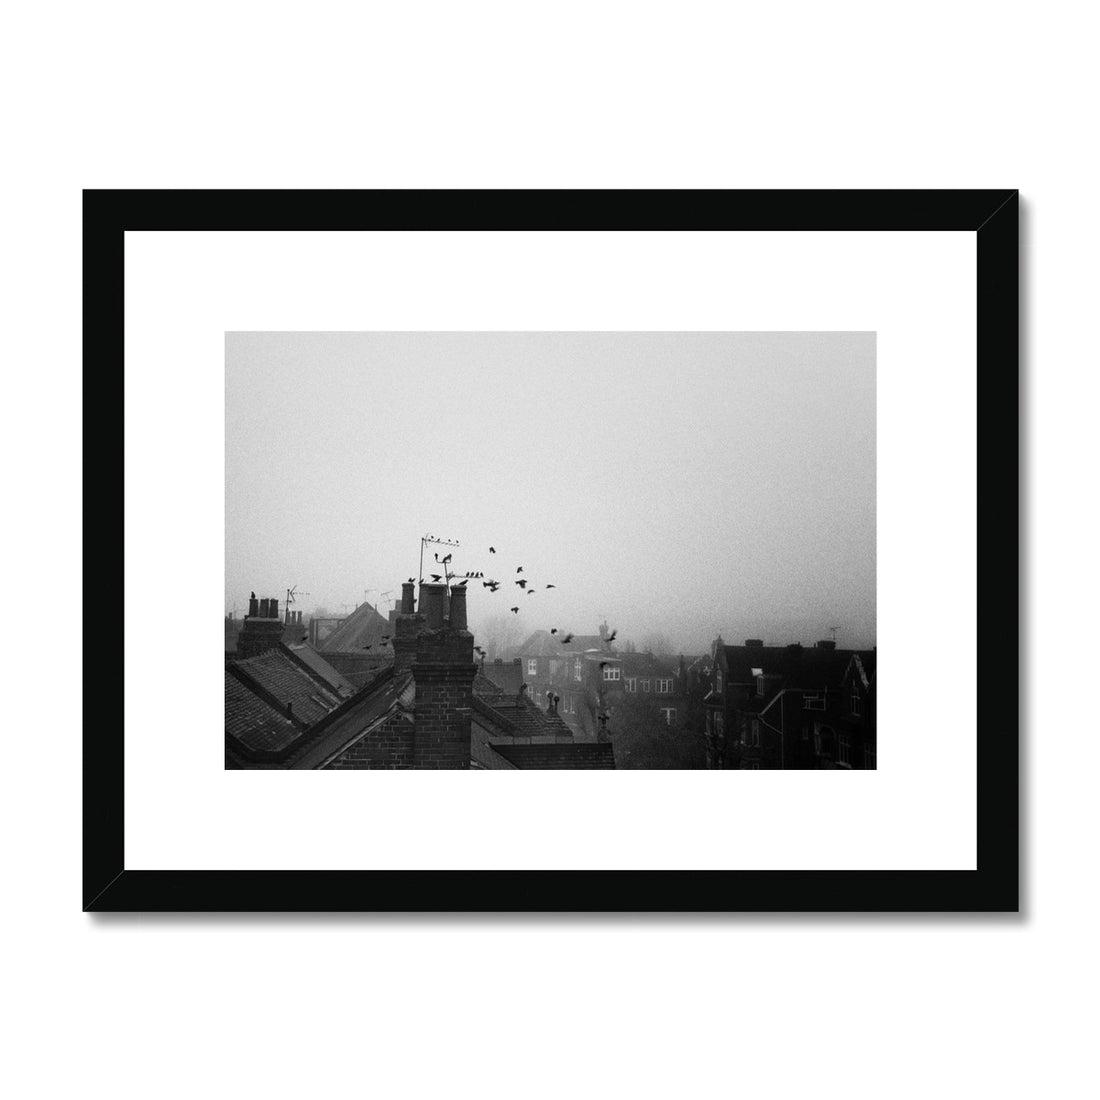 Birds Prepare for the Misty Day Ahead - Framed & Mounted Print